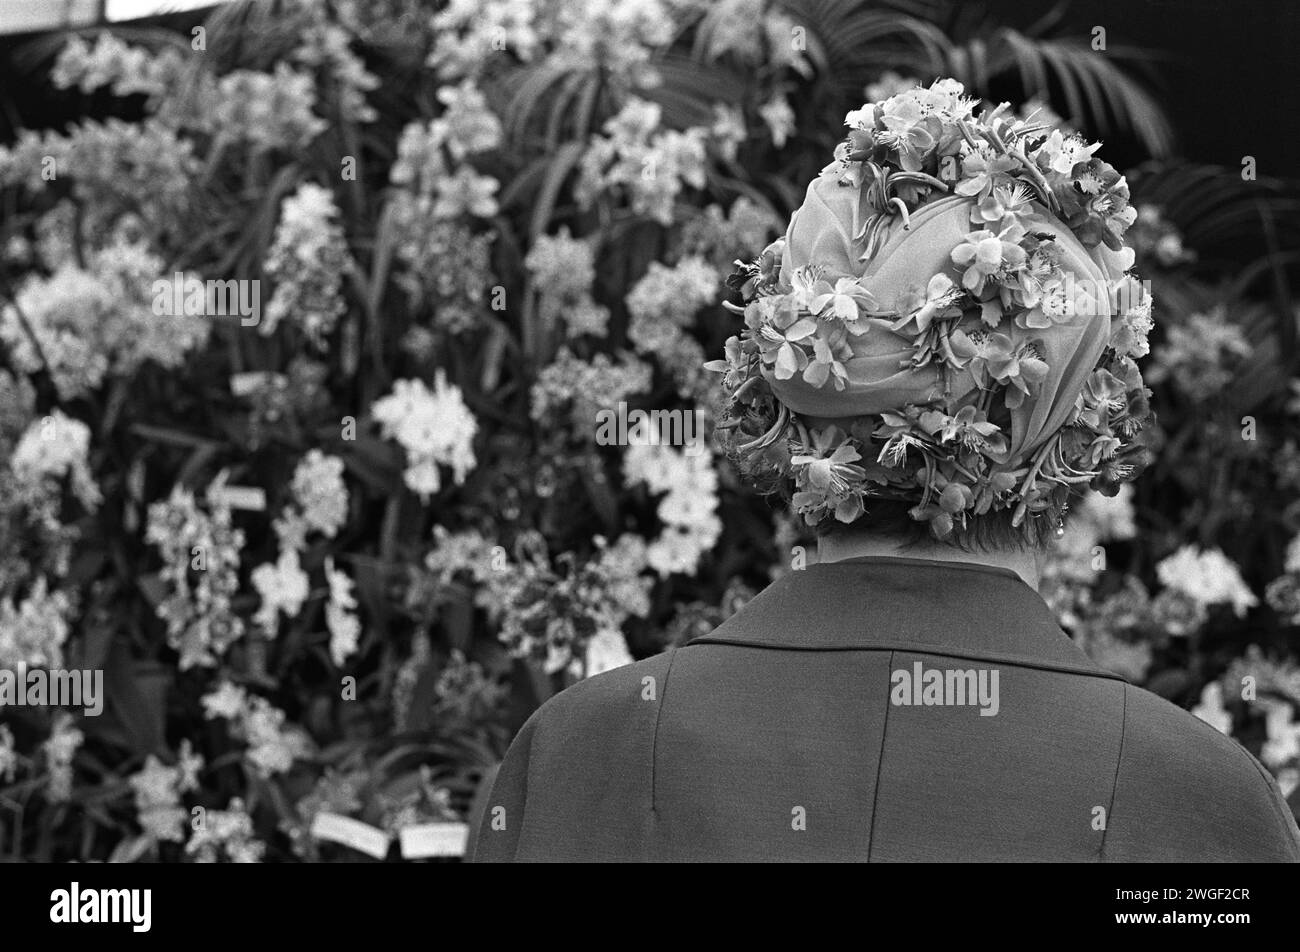 Chelsea Flower Show 1960s UK. A woman in a floral hat admires a stand of Narcissi at the Chelsea Flower Show. Chelsea, London, England May 1969 HOMER SYKES Stock Photo